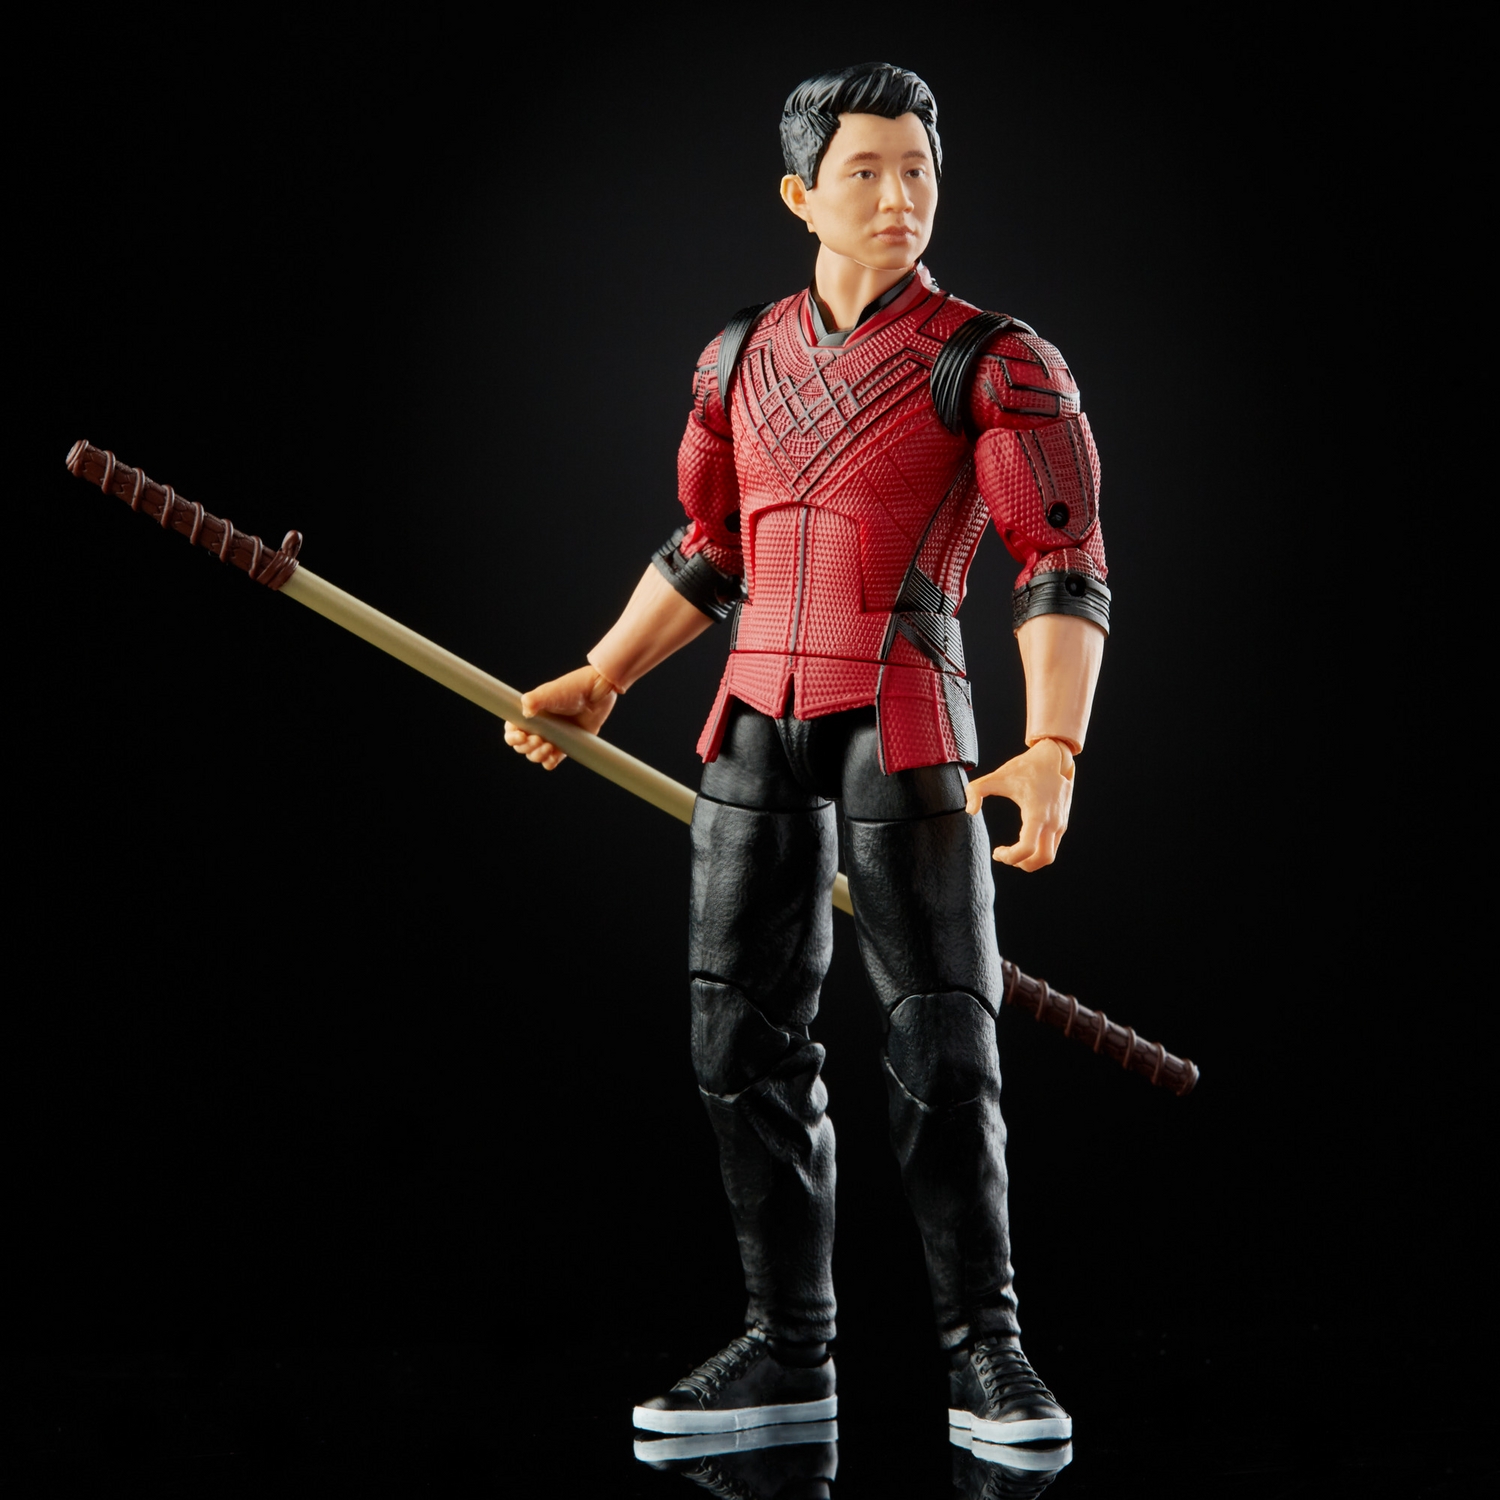 MARVEL LEGENDS SERIES 6-INCH SHANG-CHI AND THE LEGEND OF THE TEN RINGS - Shang-Chi oop1.jpg